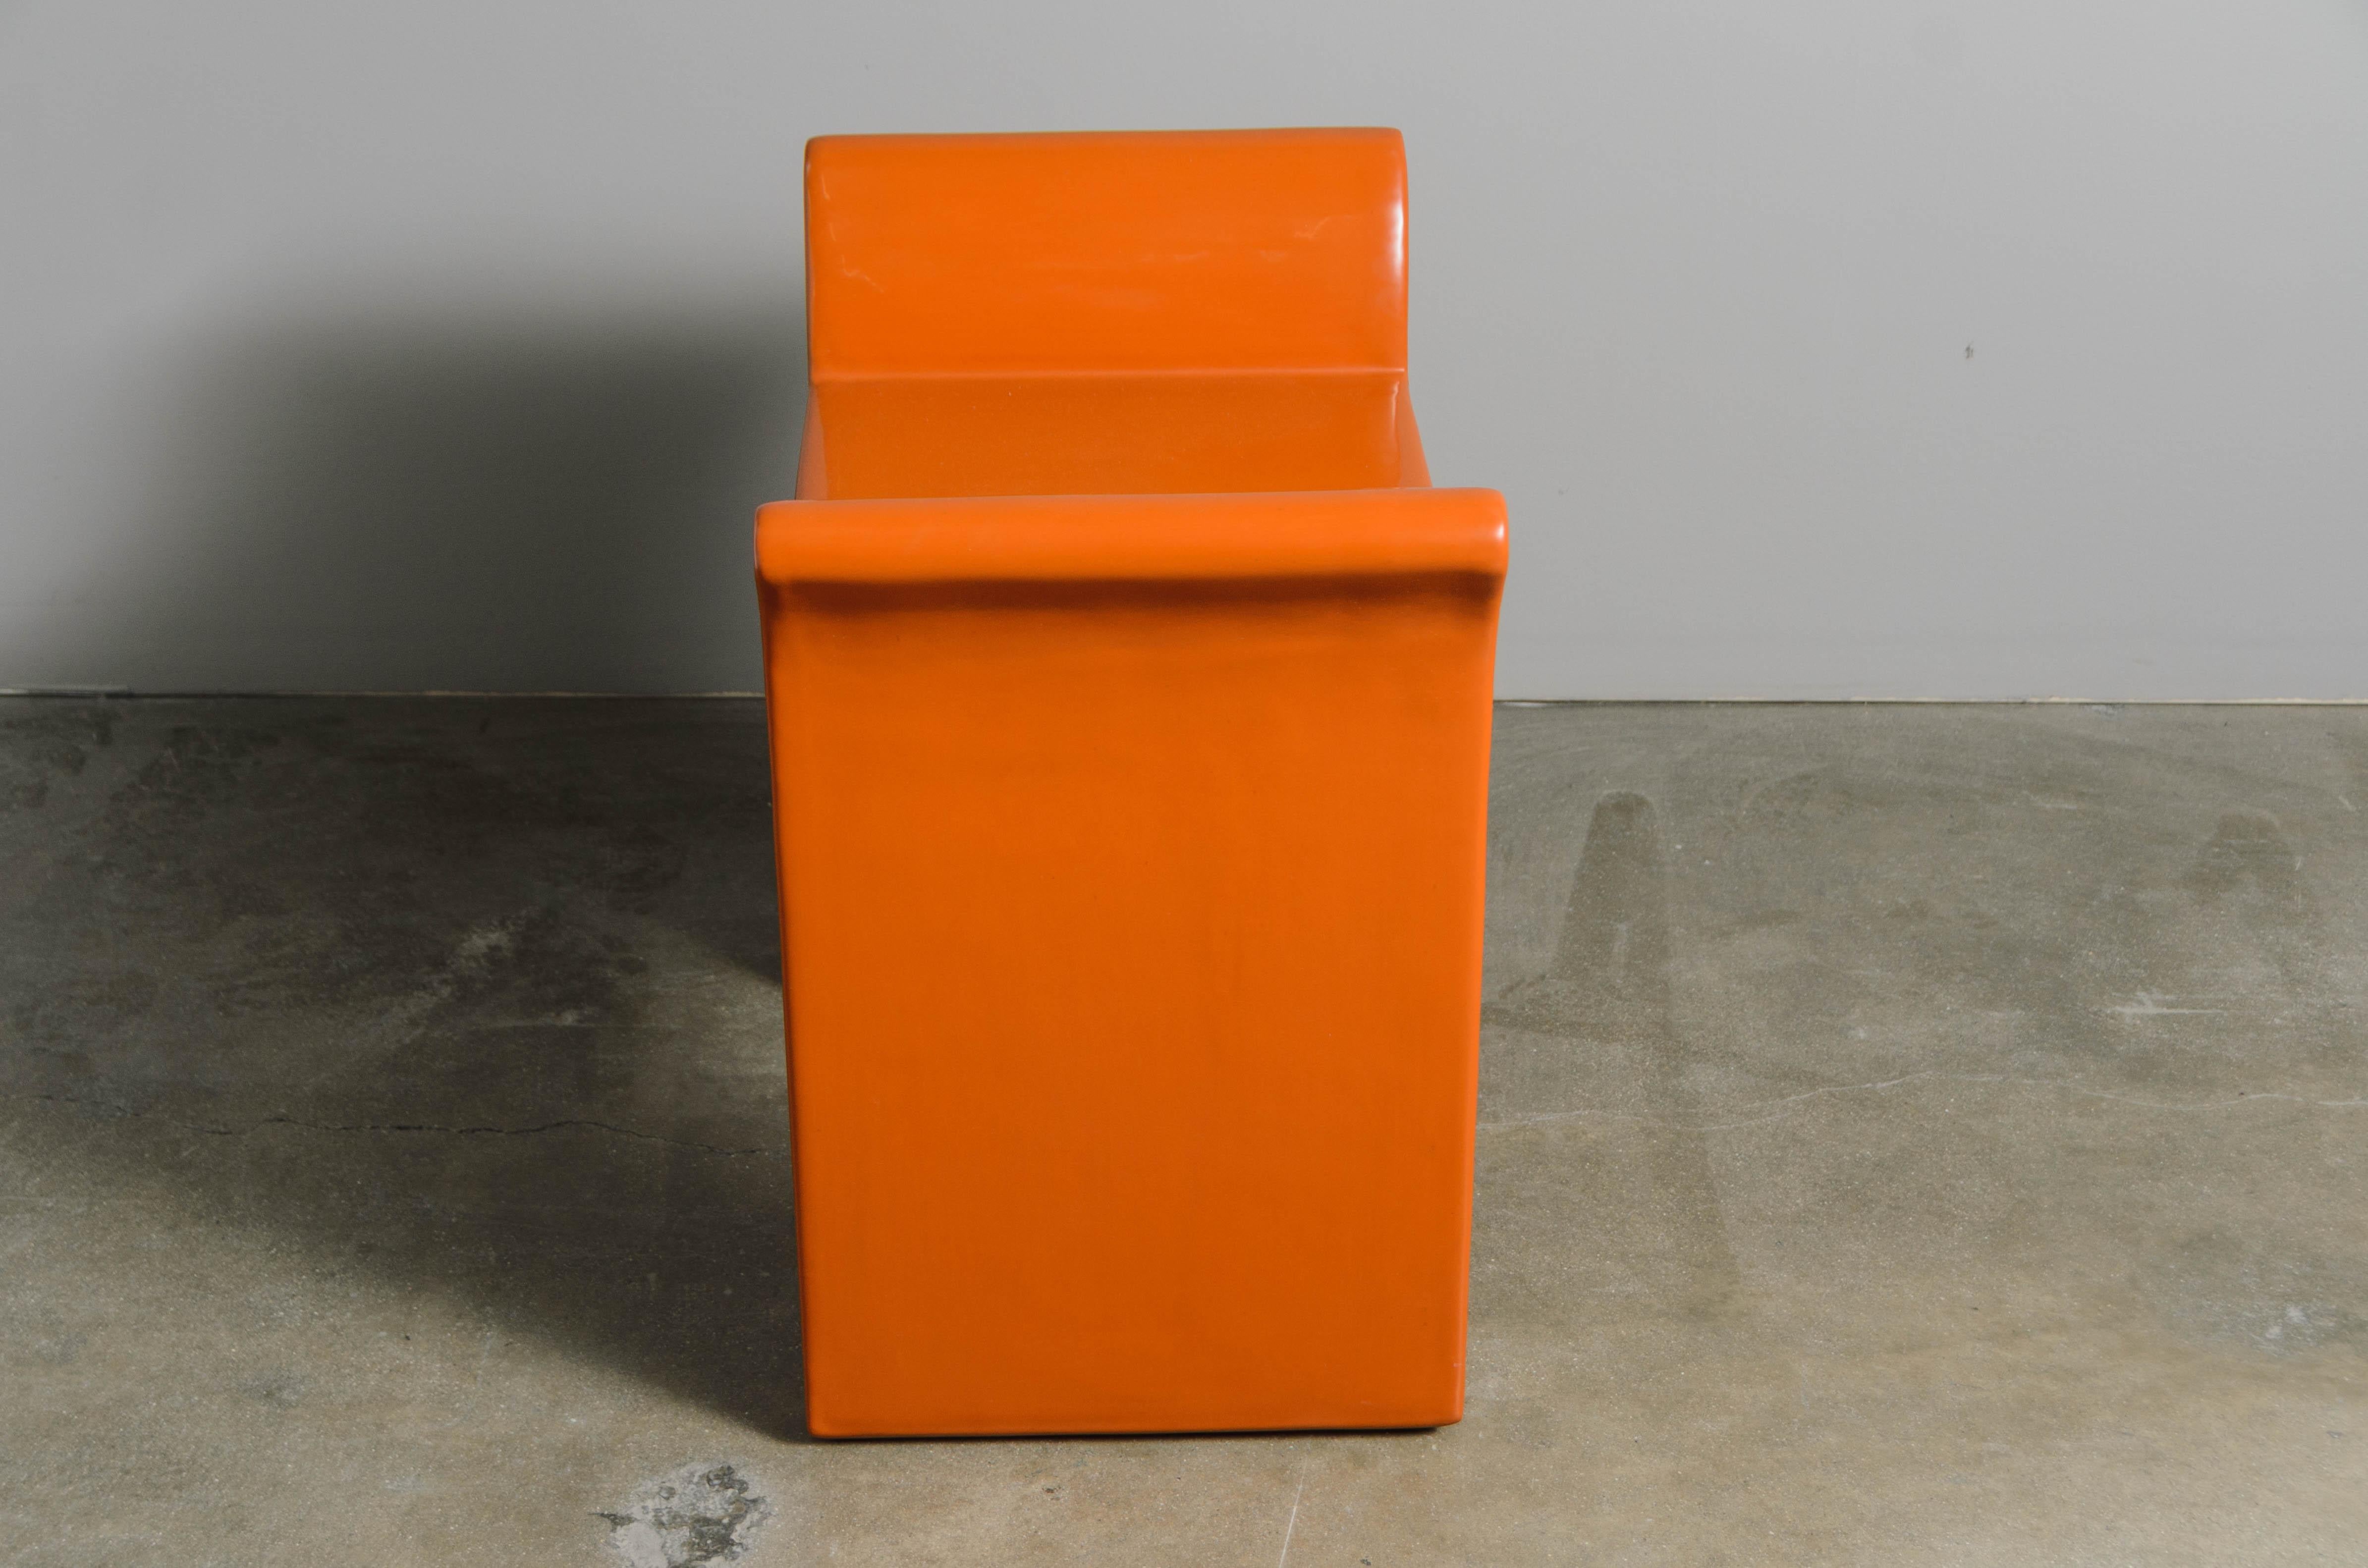 Hand-Crafted Robert Kuo Vanity Seat in Mila Lacquer, Contemporary, Limited Edition For Sale